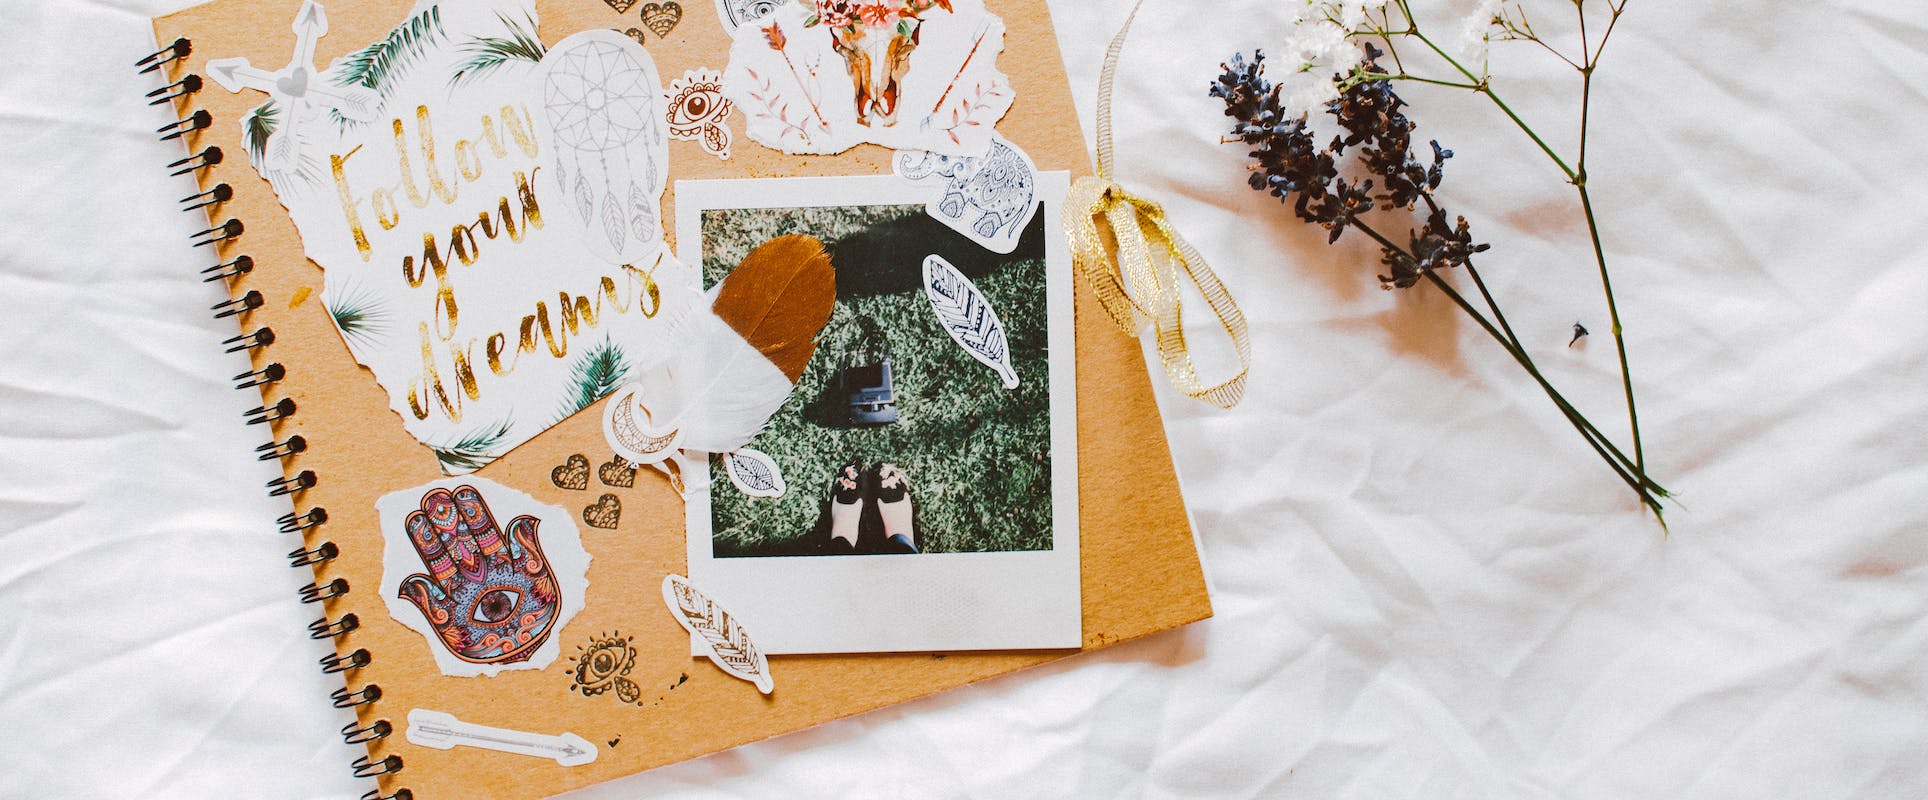 Easy scrapbook layout ideas to spark your imagination